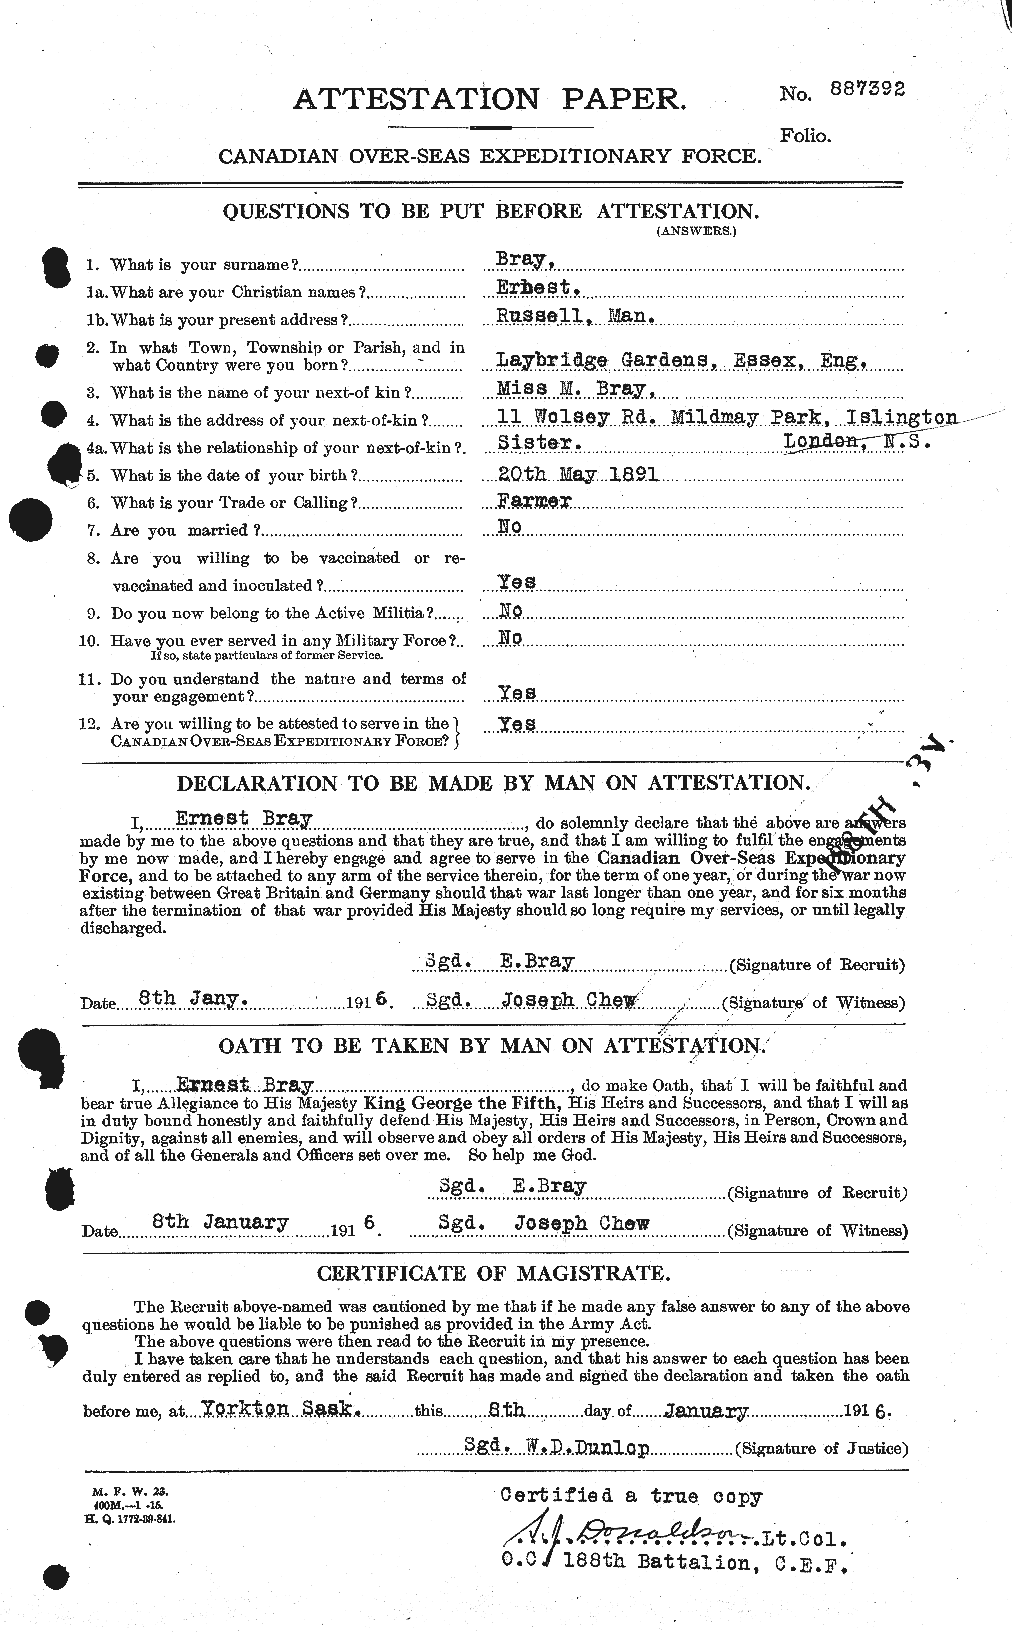 Personnel Records of the First World War - CEF 260702a